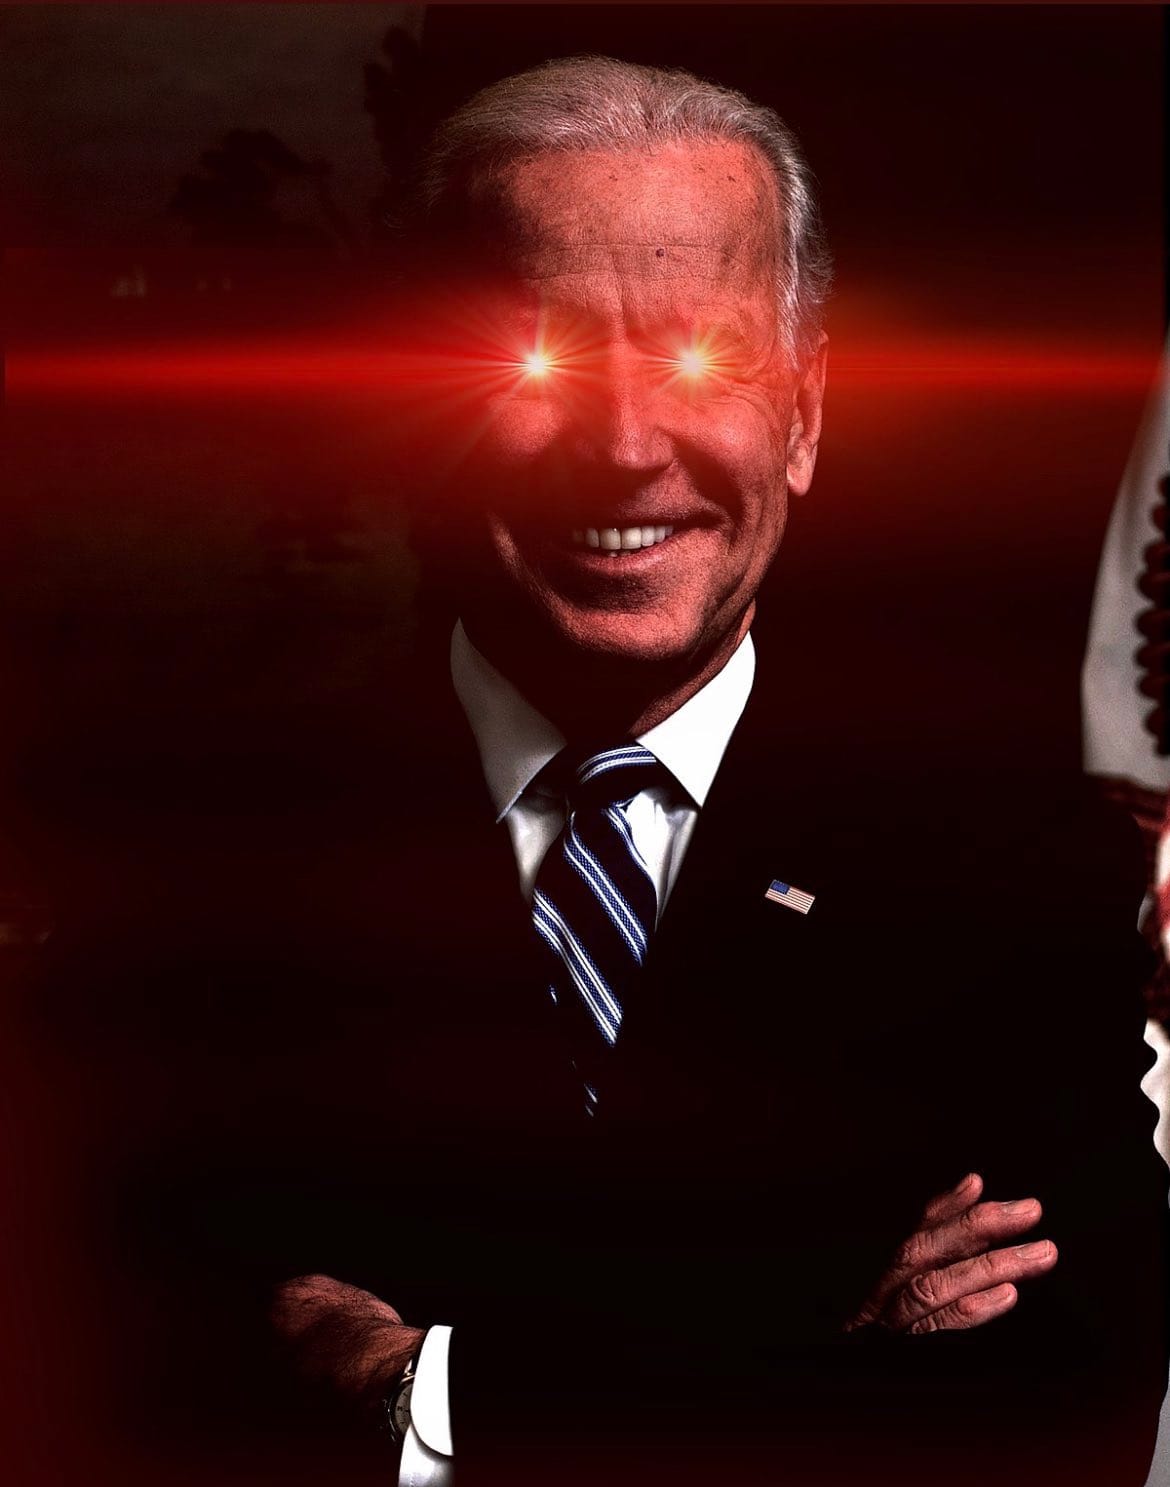 Joe Biden Becomes Laser Eyed Podcaster, Joins #FixTheFilters Movement